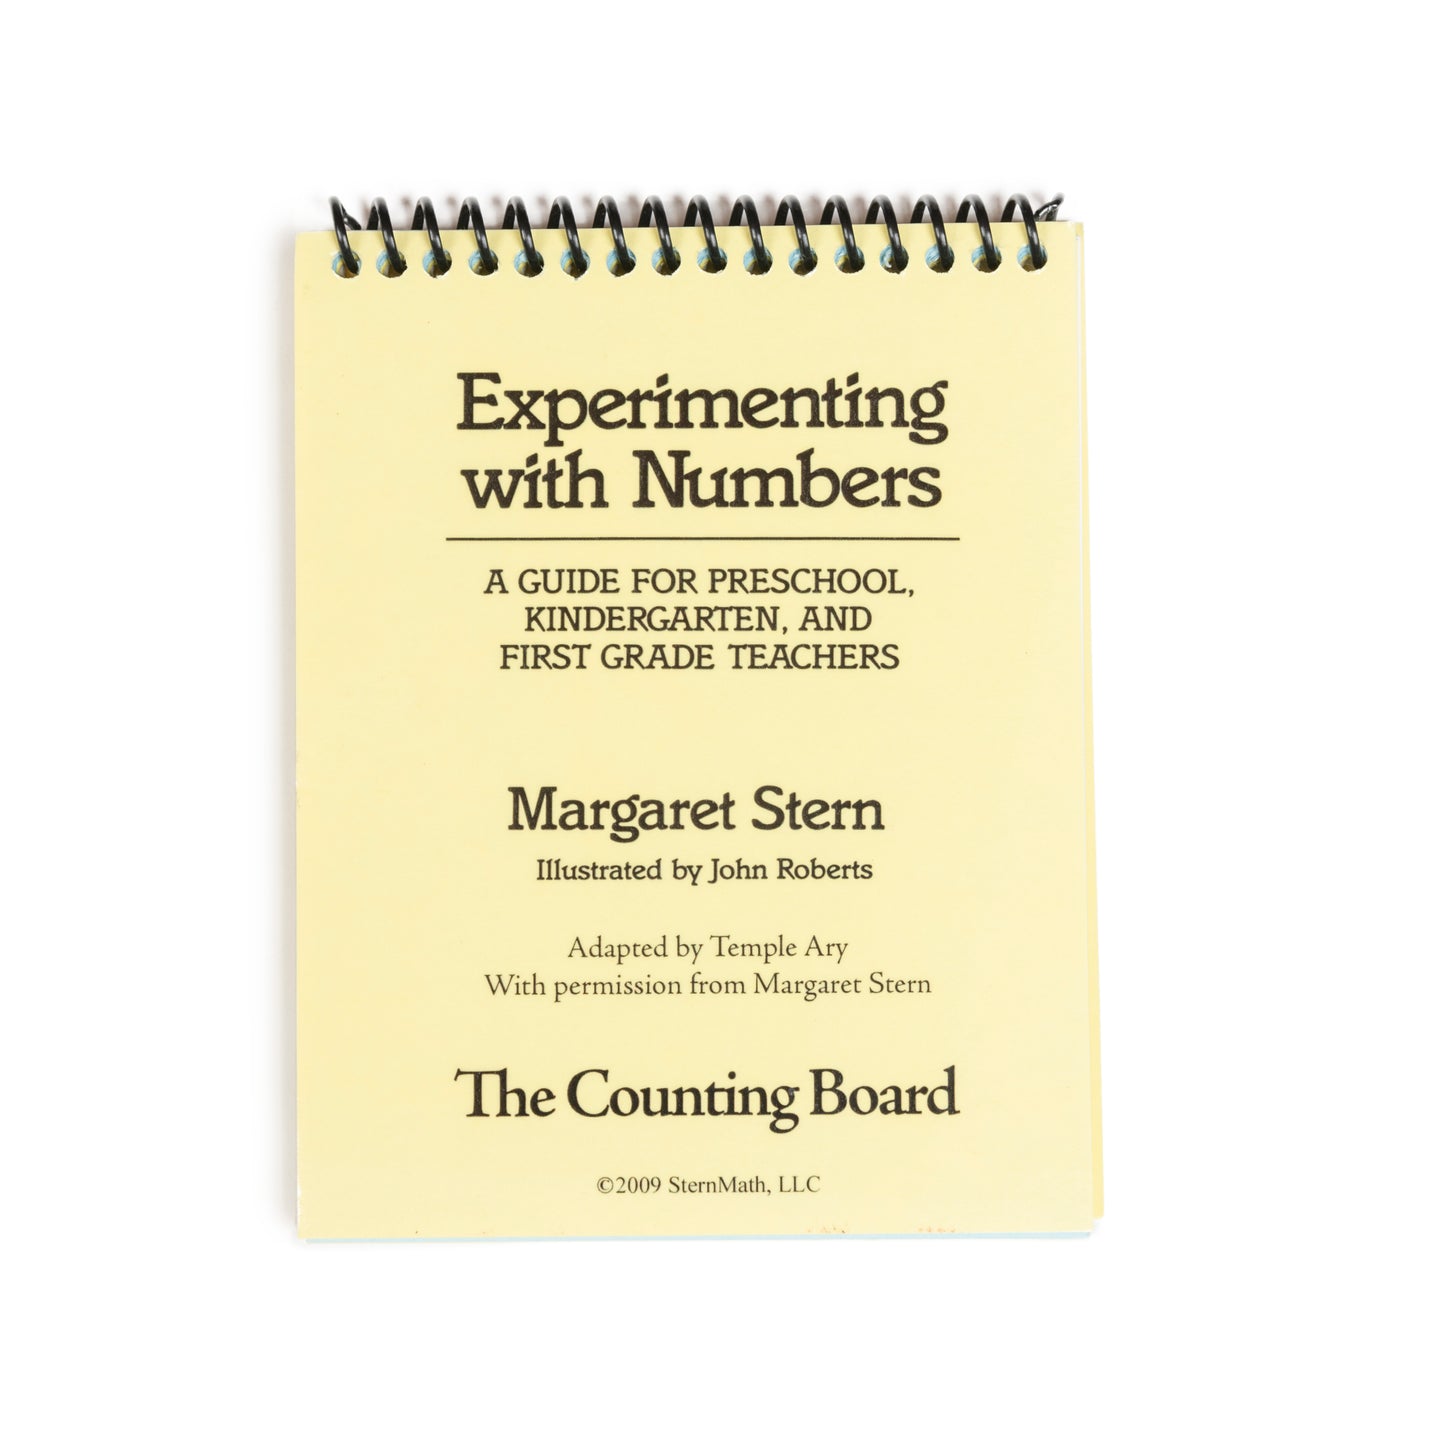 Pocket-sized flip book: The Counting Board